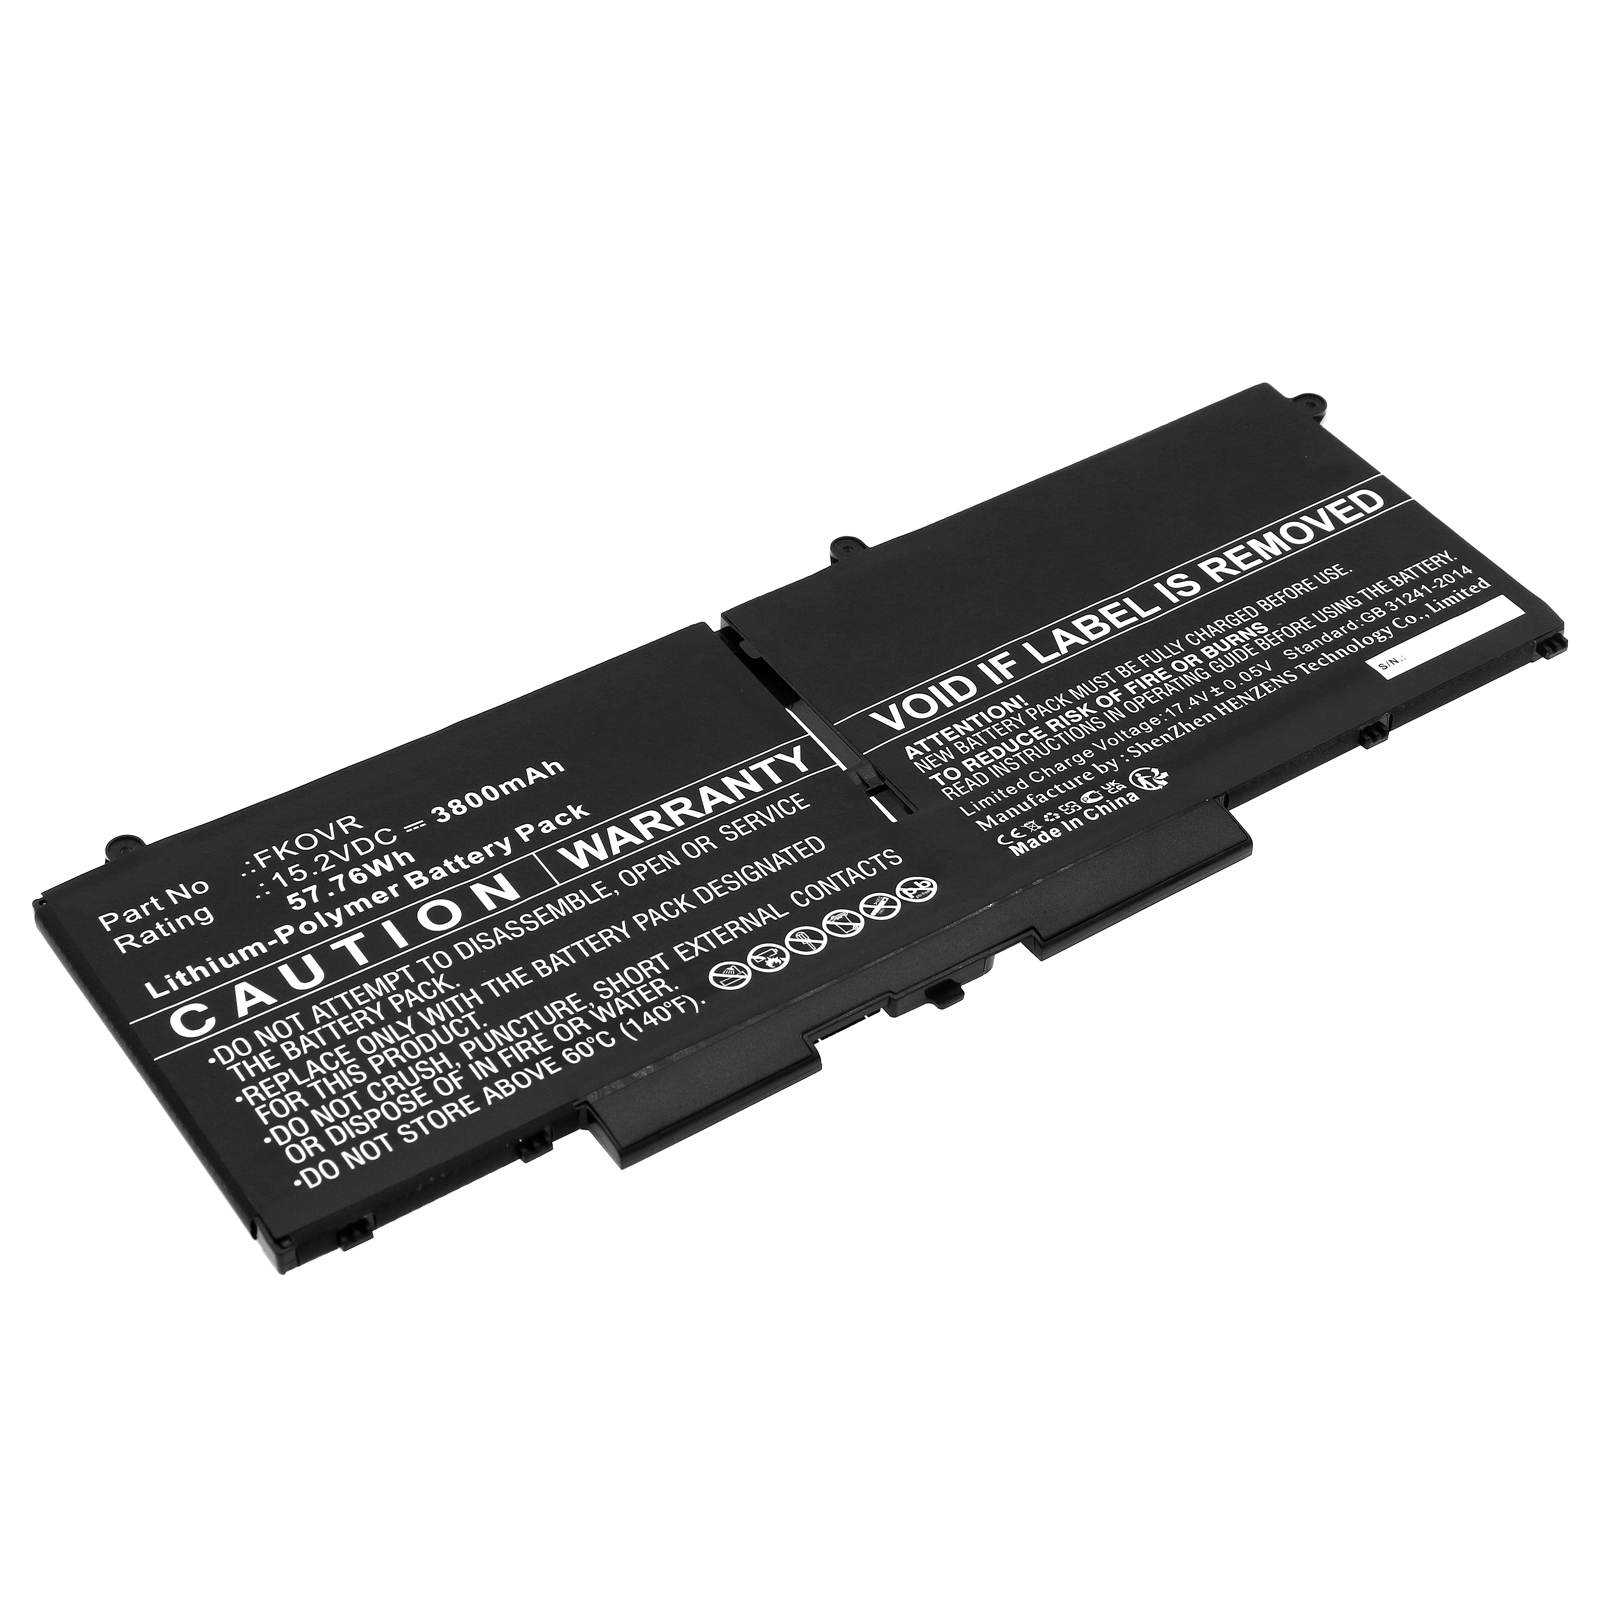 Synergy Digital Laptop Battery, Compatible with DELL 8H6WD Laptop Battery (Li-Pol, 15.2V, 3800mAh)